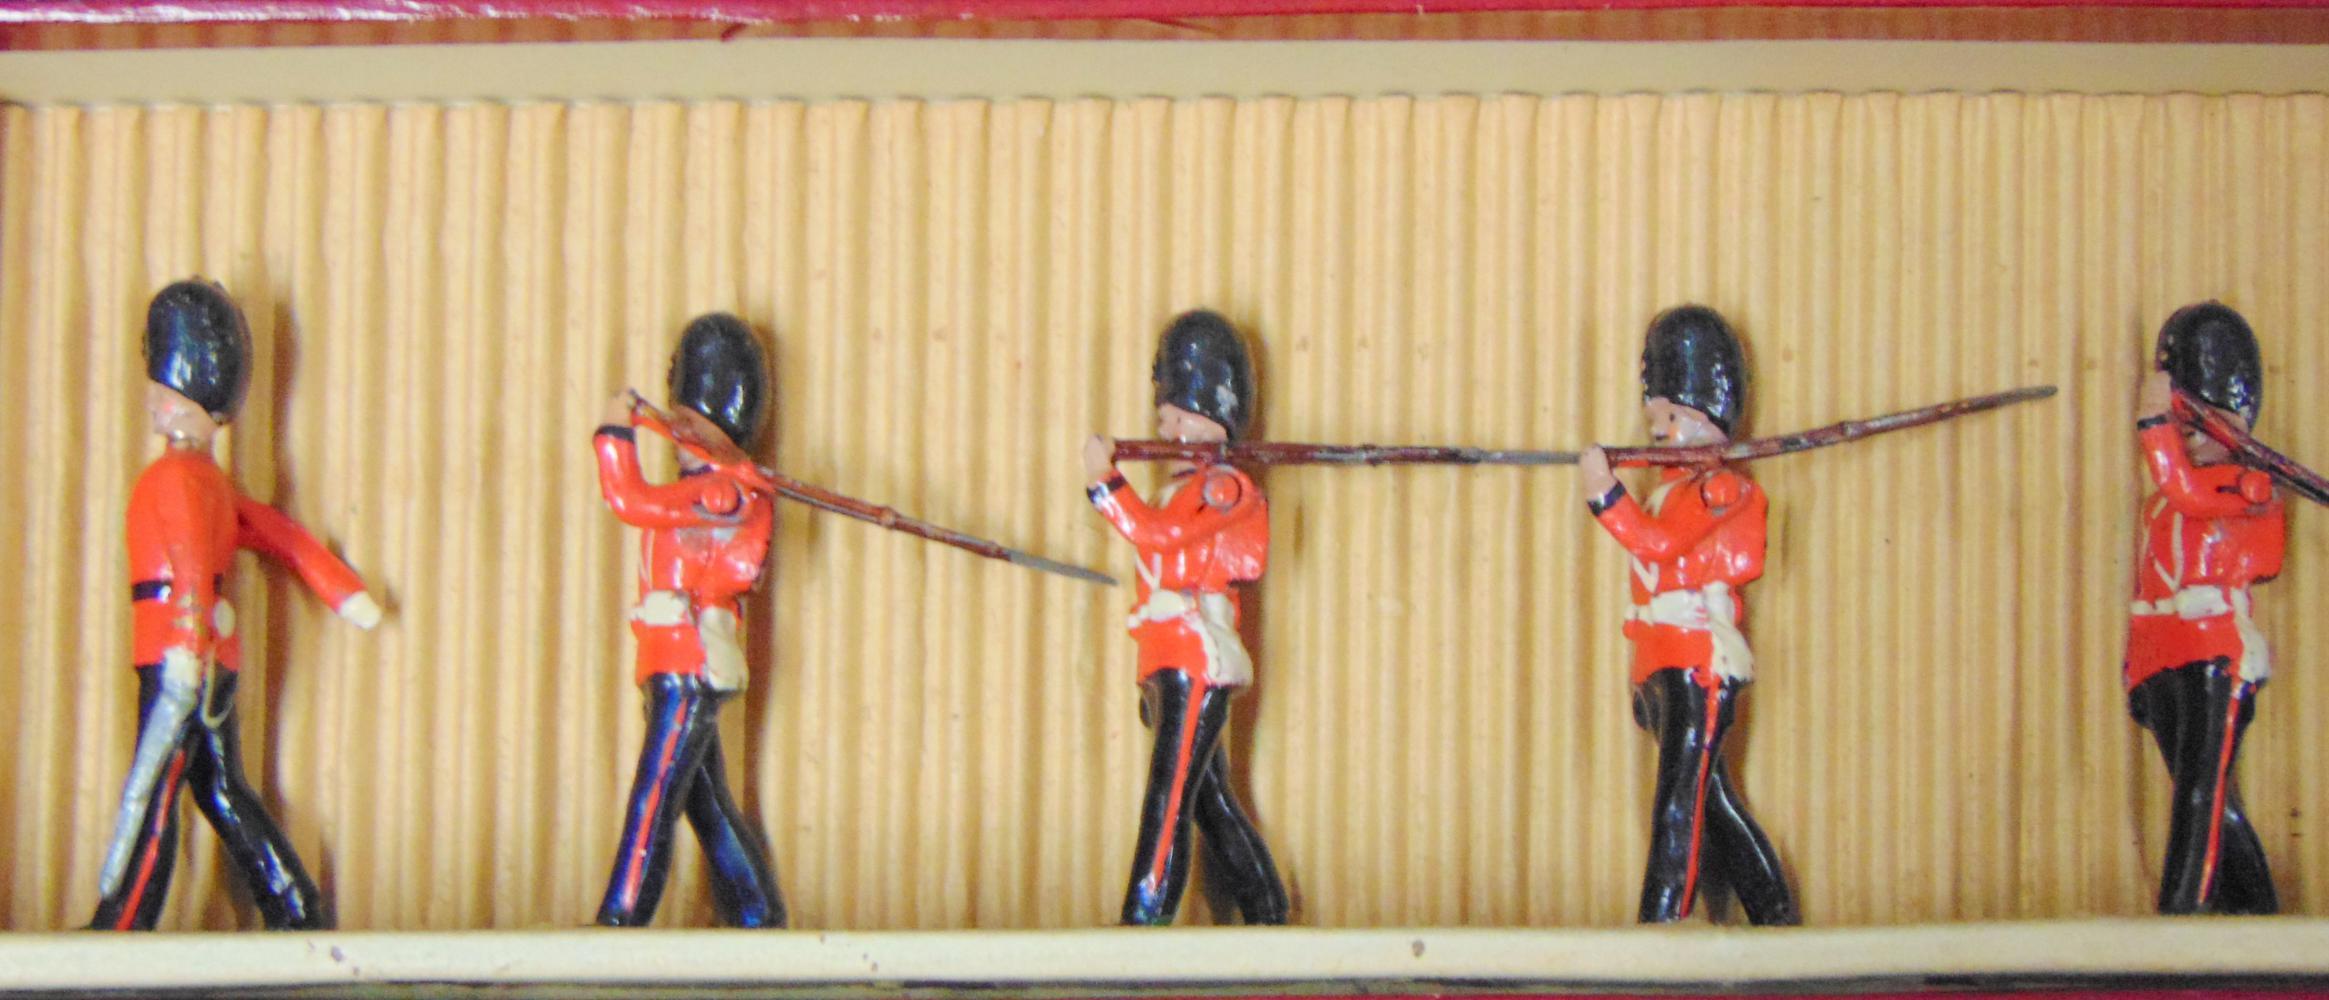 Britains #7 Royal Fusiliers Boxed.